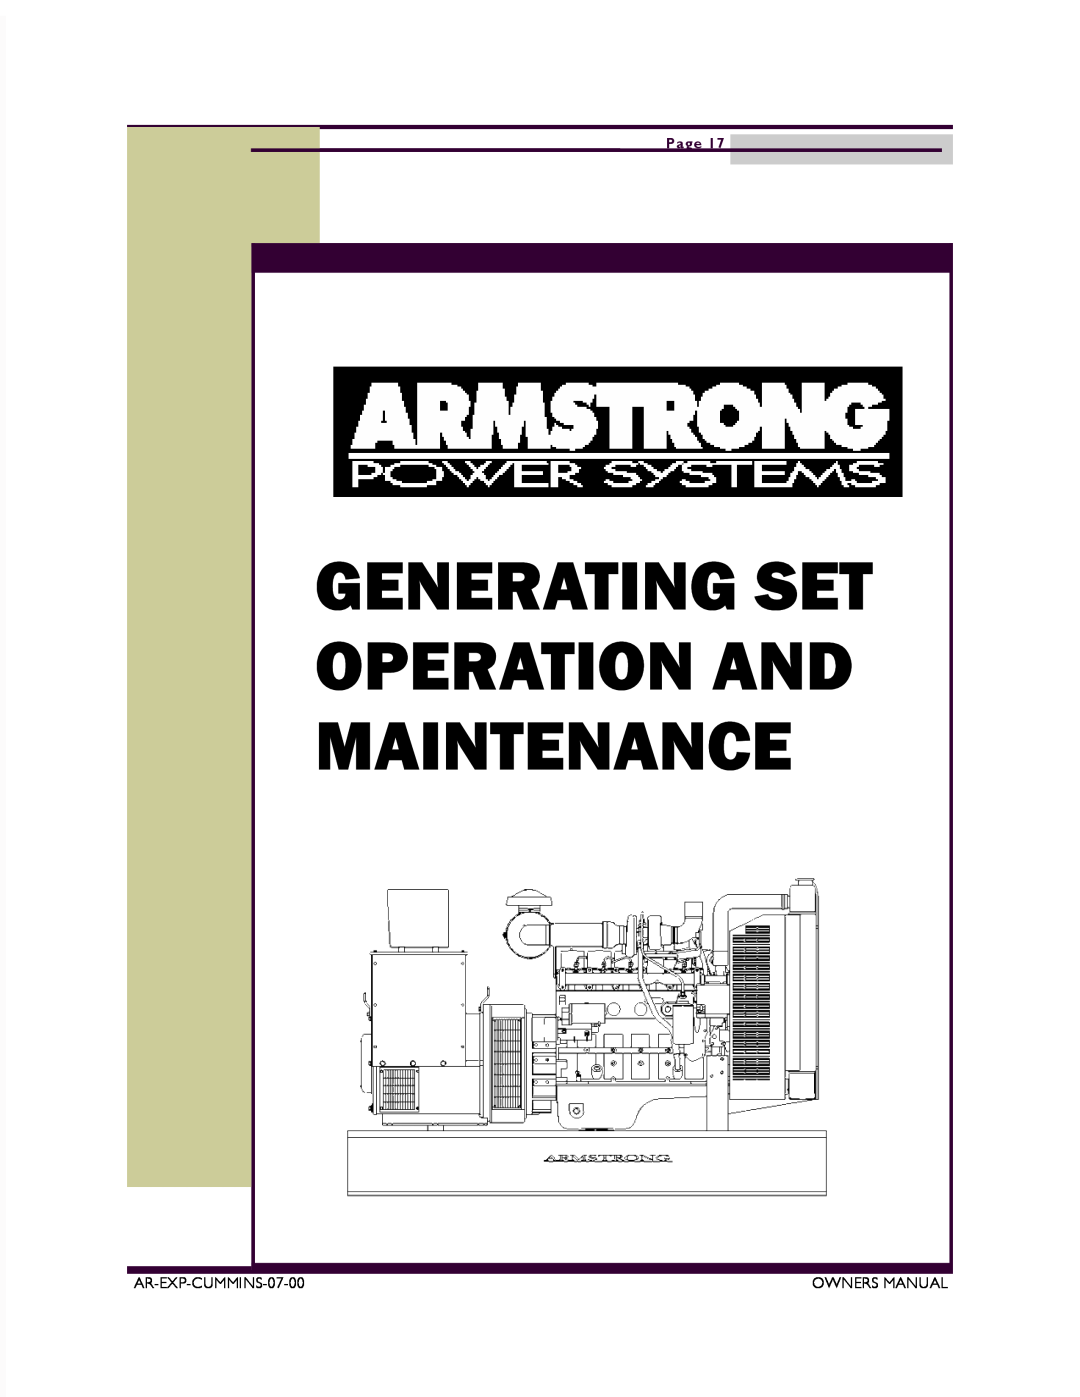 Armstrong World Industries ACUM210, ACUM84, ACUM140 Generating Set Operation And Maintenance, AR-EXP-CUMMINS-07-00, Page 